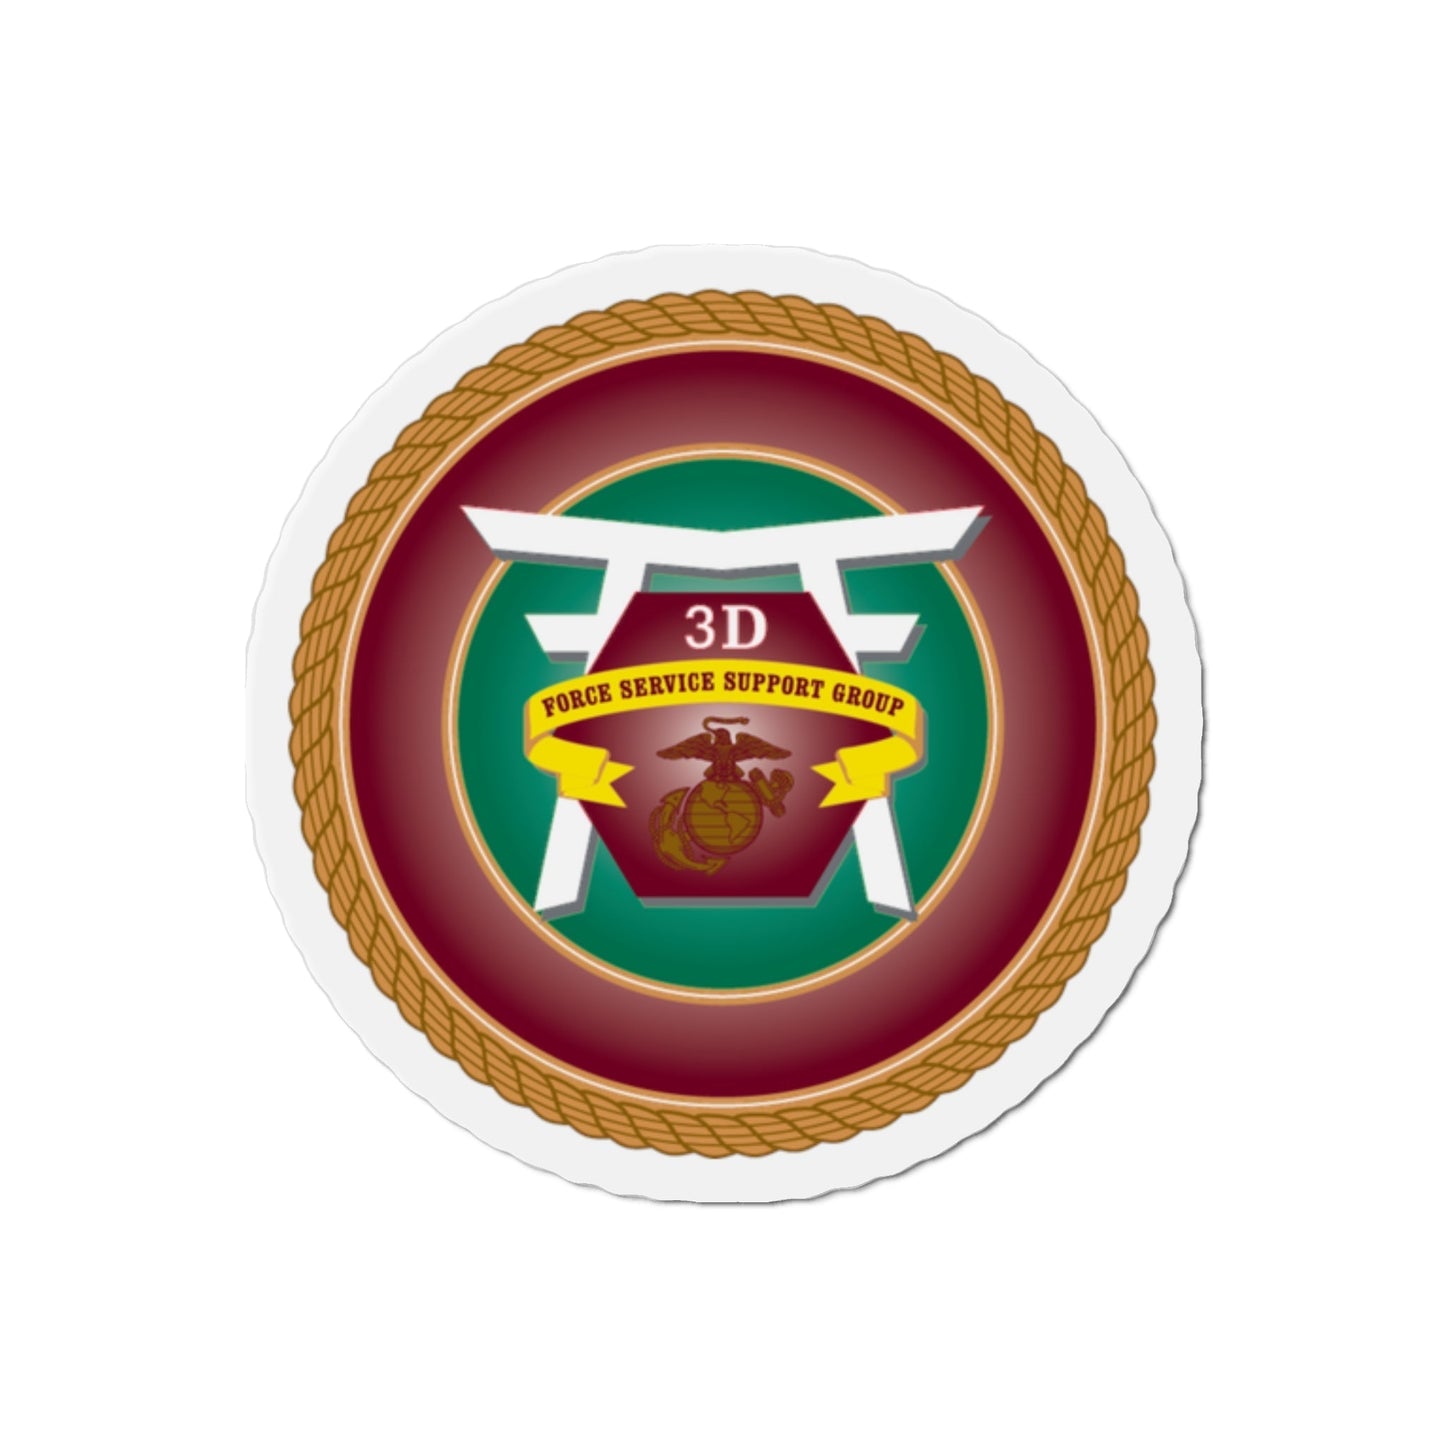 3rd Force Service Support Group 3D FSSG (USMC) Die-Cut Magnet-2 Inch-The Sticker Space